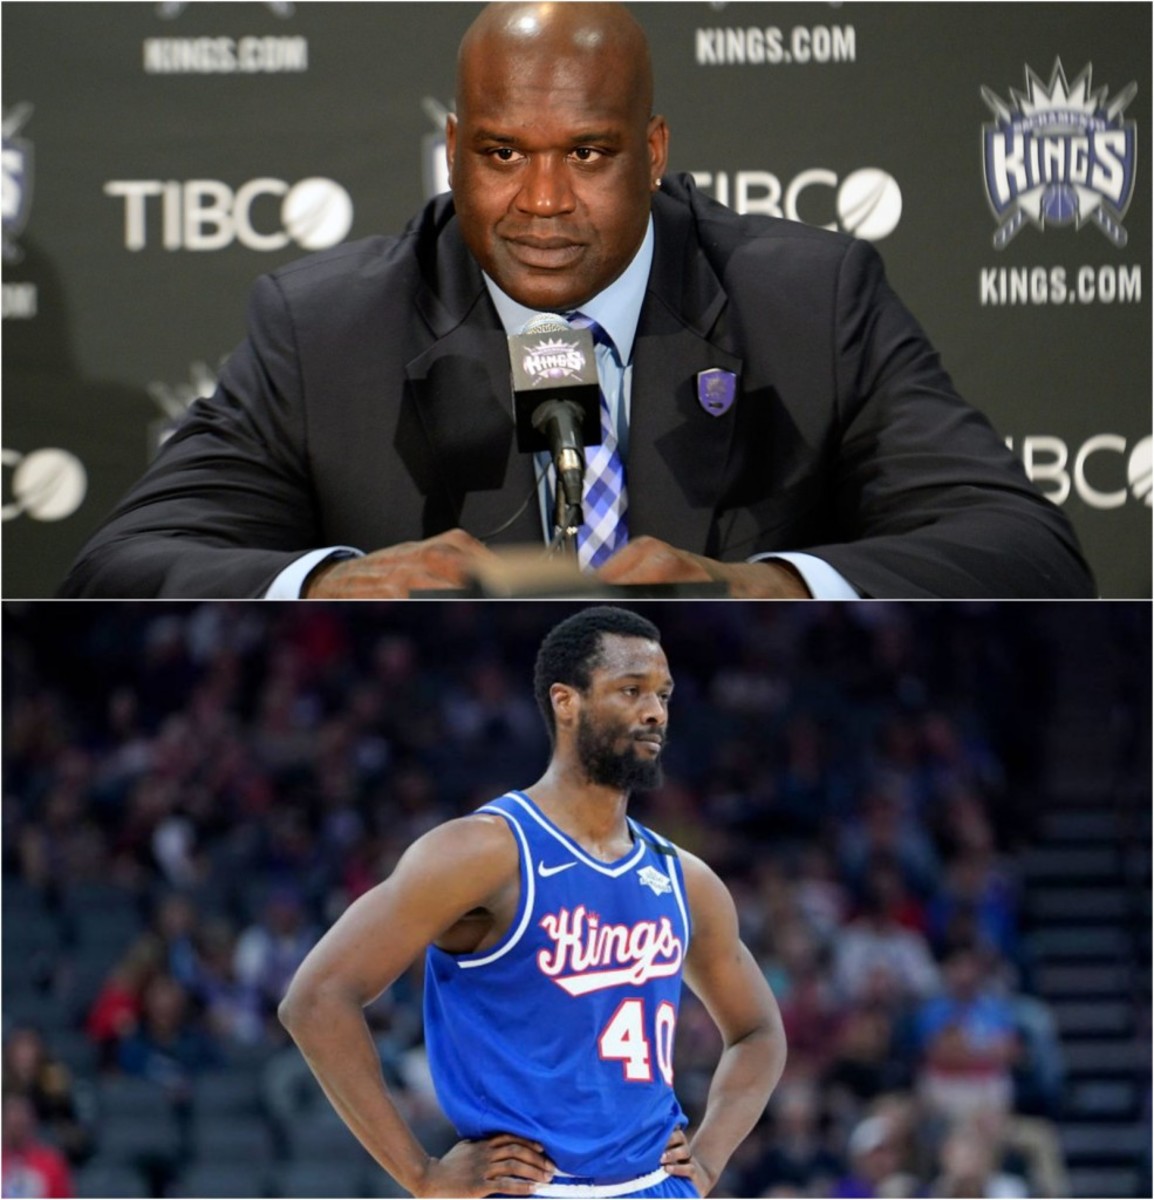 Shaquille O'Neal Clowns One Of His Own Players On National Television